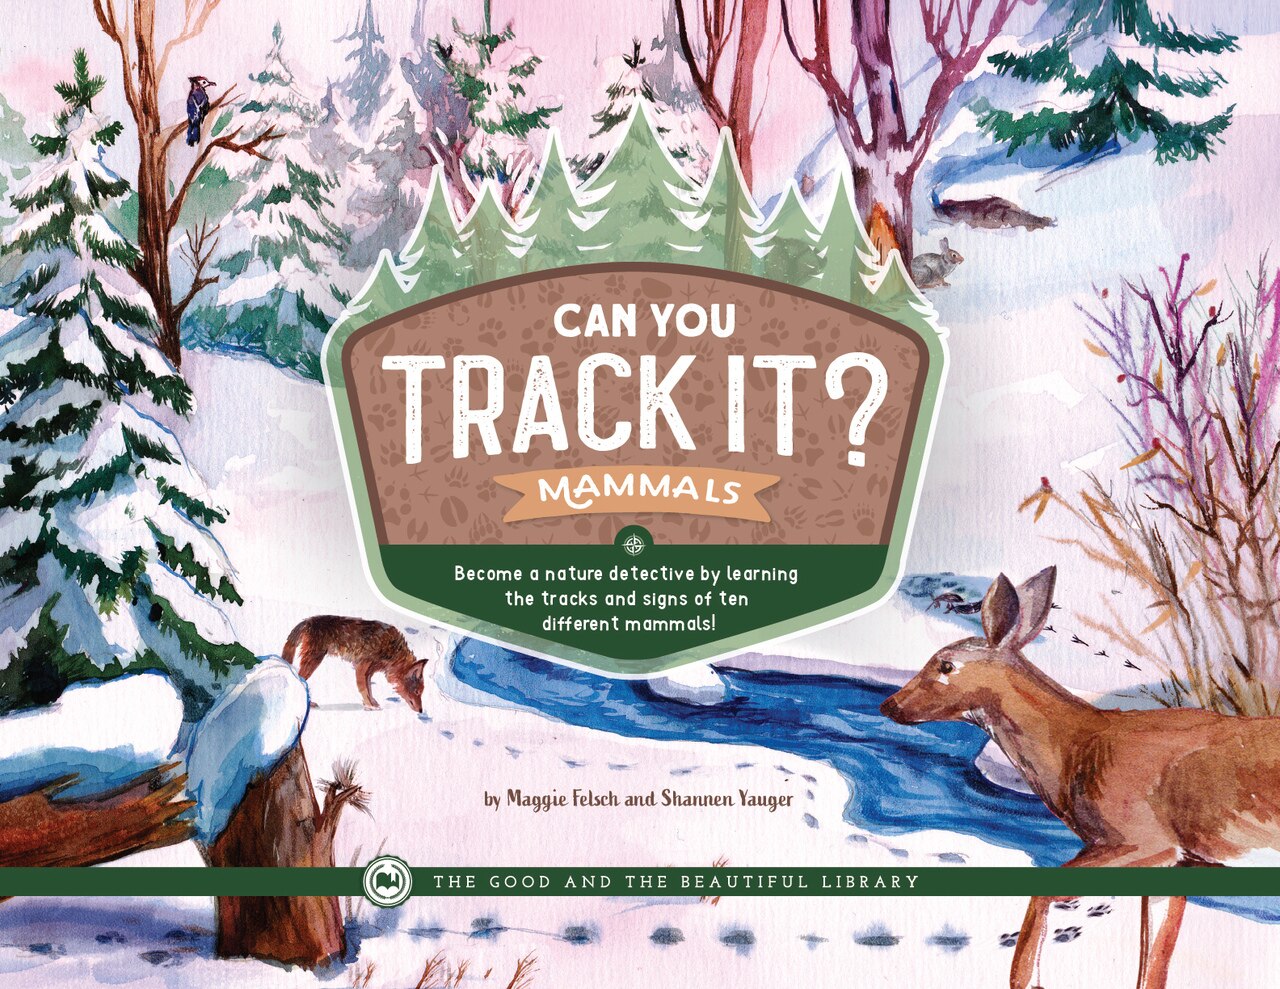 Can You Track it? Mammals